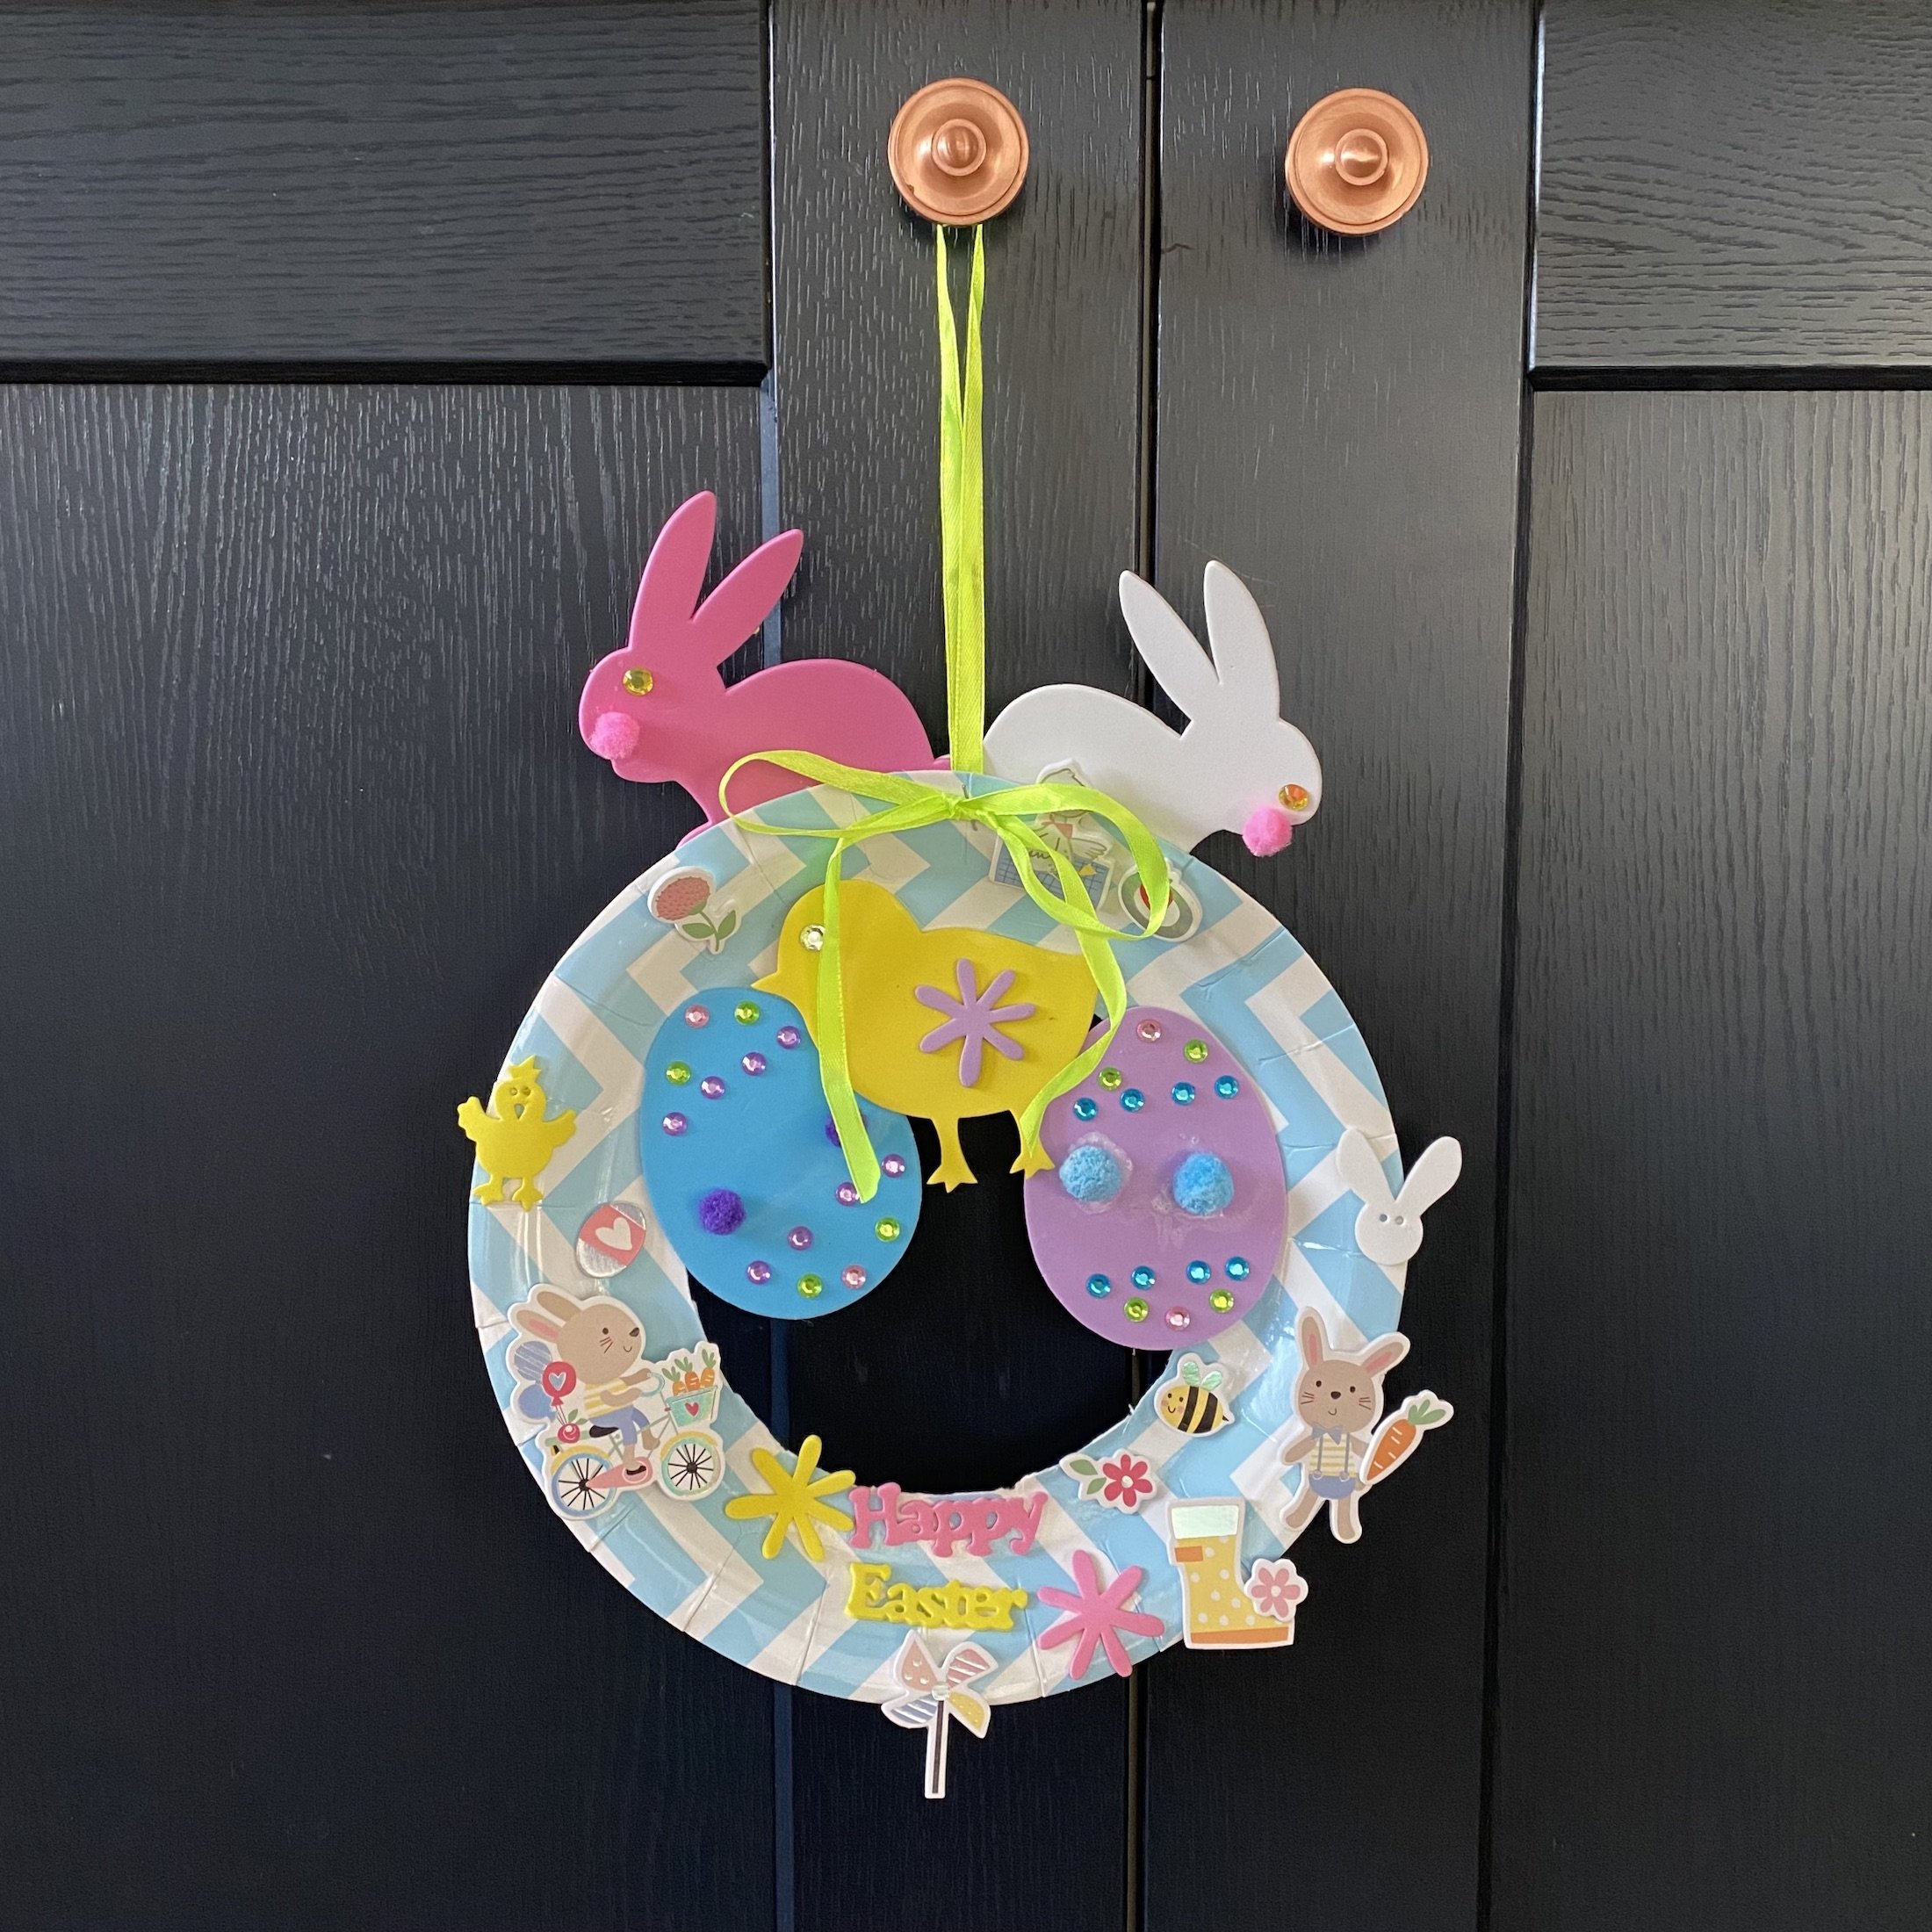 Easy craft ideas for kids - Easter Wreaths! — Sarah Ransome Art